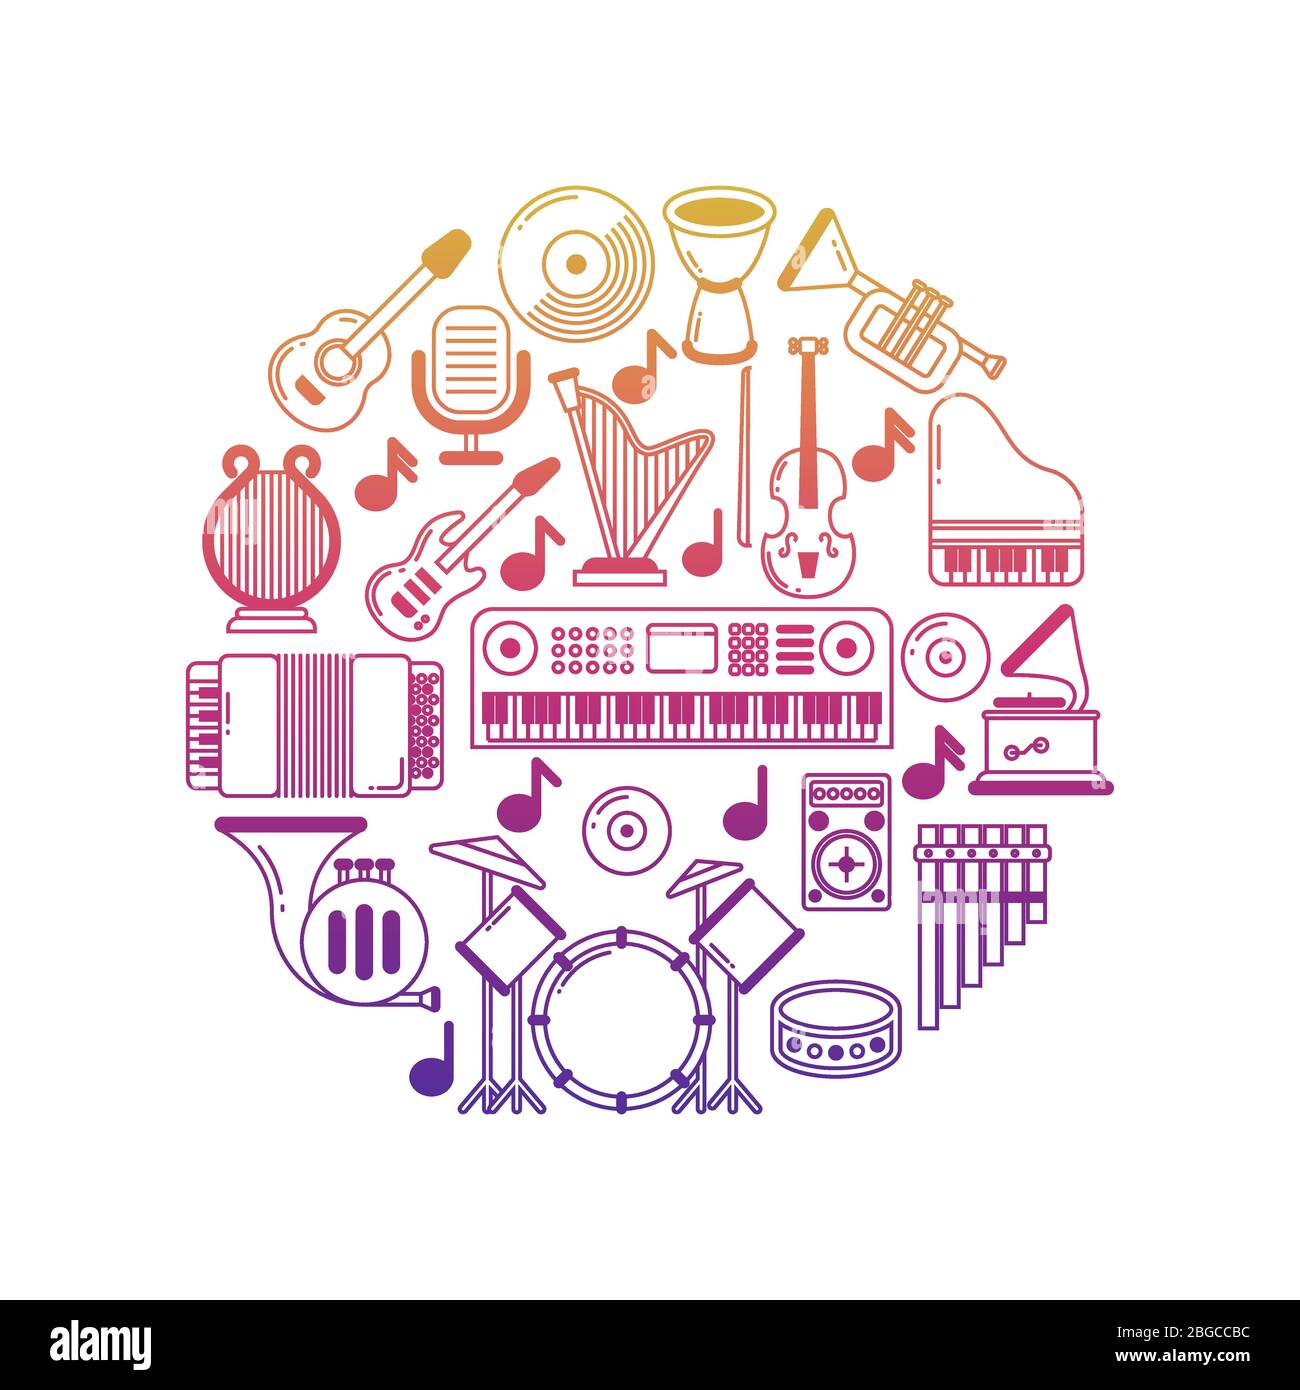 Bright vector music poster with musical instruments icons in round illustration Stock Vector